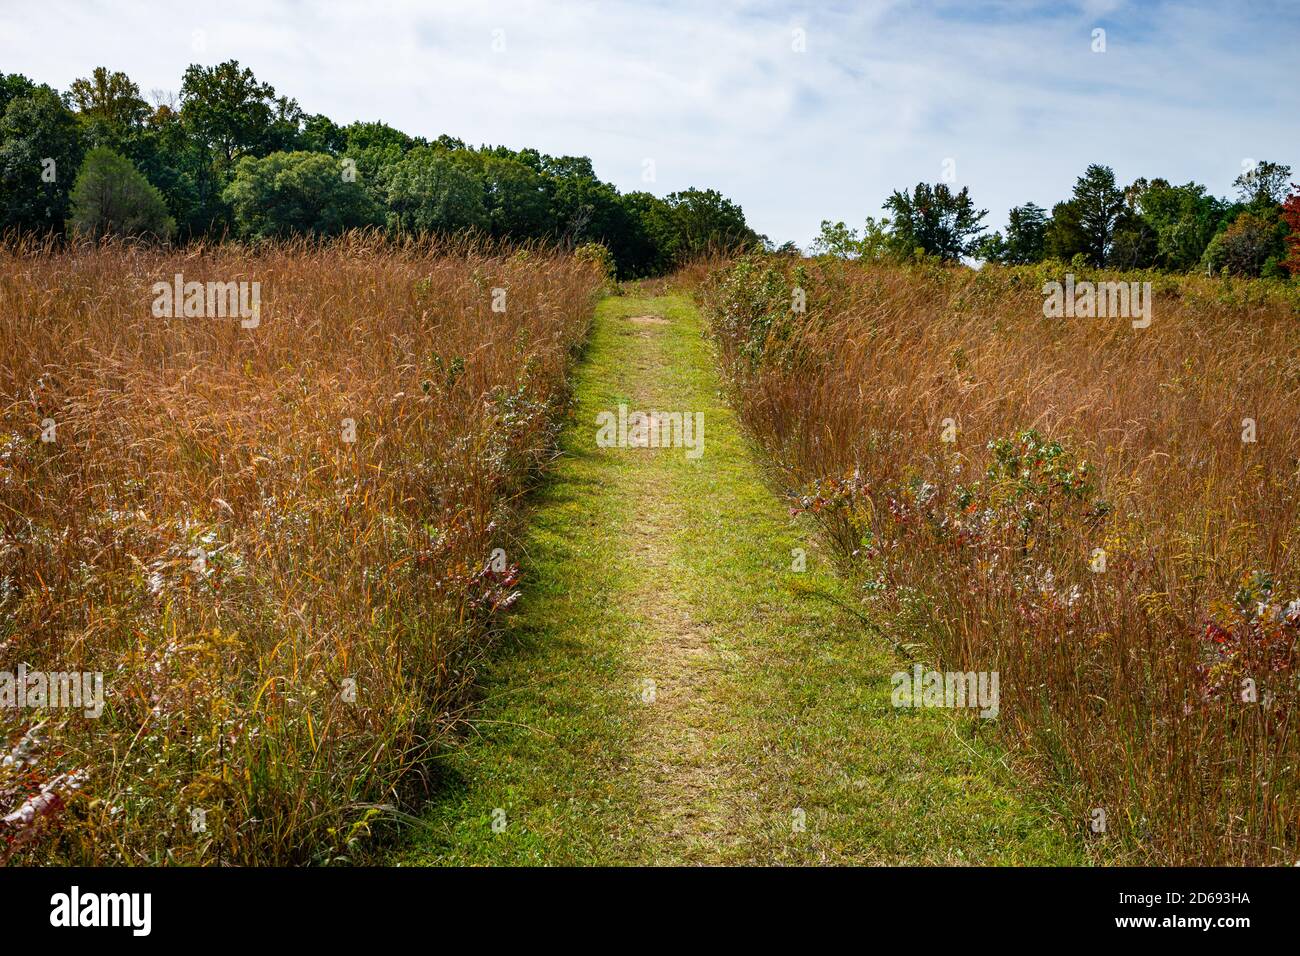 A grass waling path in a meadow Stock Photo